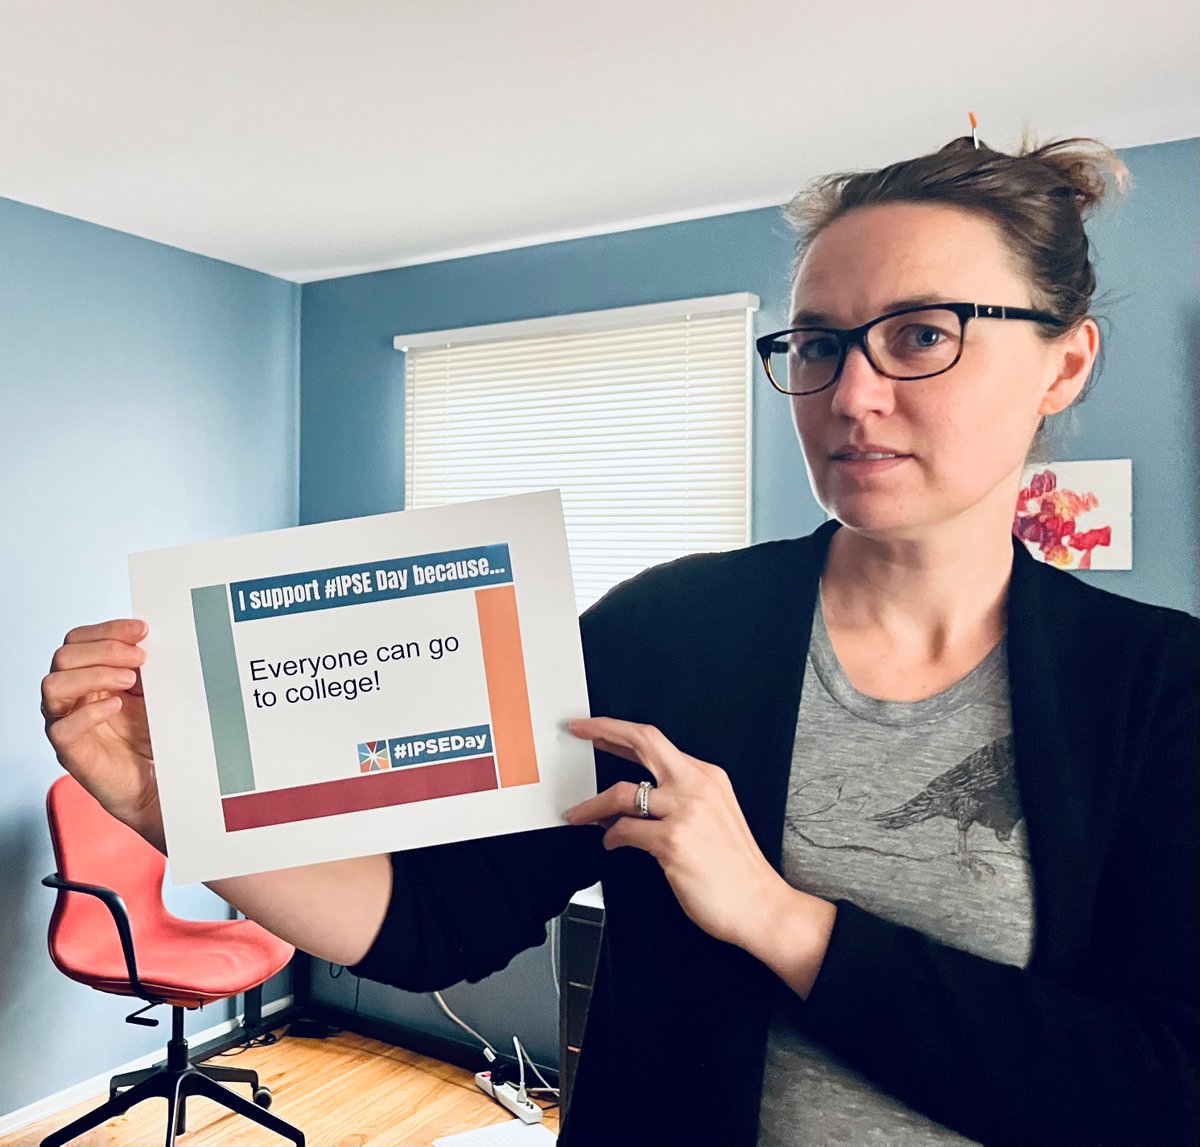 #IPSEDay is here! Spread the word in support of #InclusiveHigherEd! AUCD believes all students deserve the opportunity to go to college. Keep the conversation going by sharing the #ThinkHigher. #ThinkCollege. Campaign video ➡️ thinkhighered.net